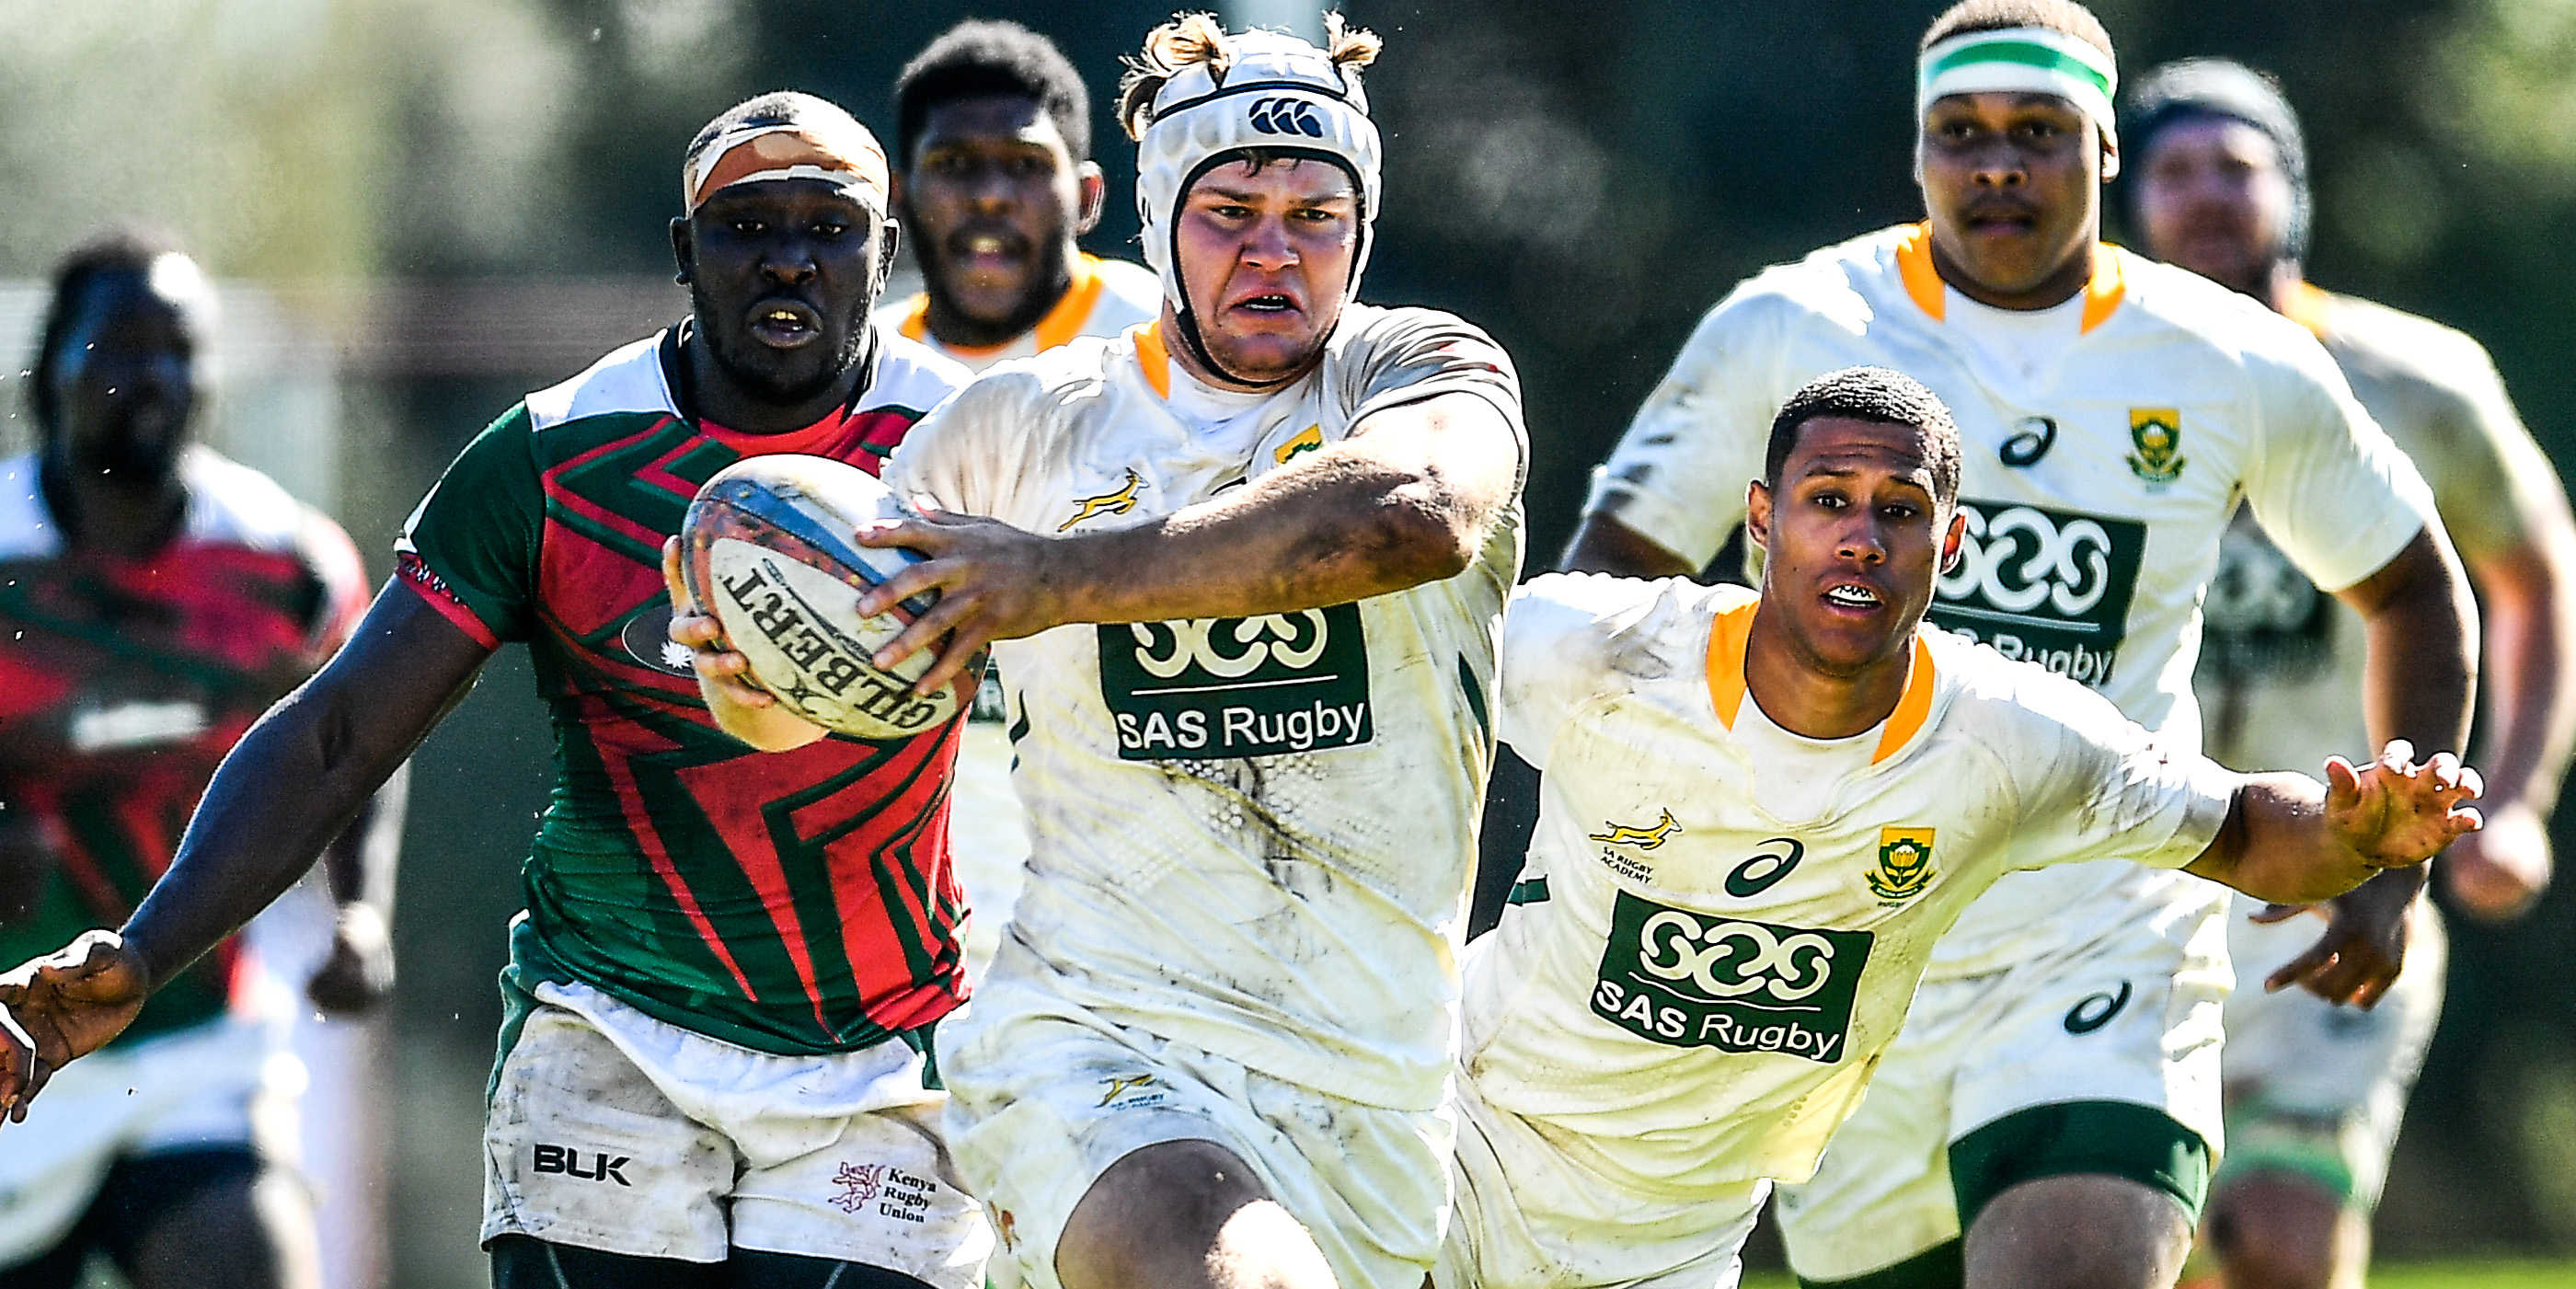 Action from the match between the SA Rugby Academy side and the Kenyan Simbas.